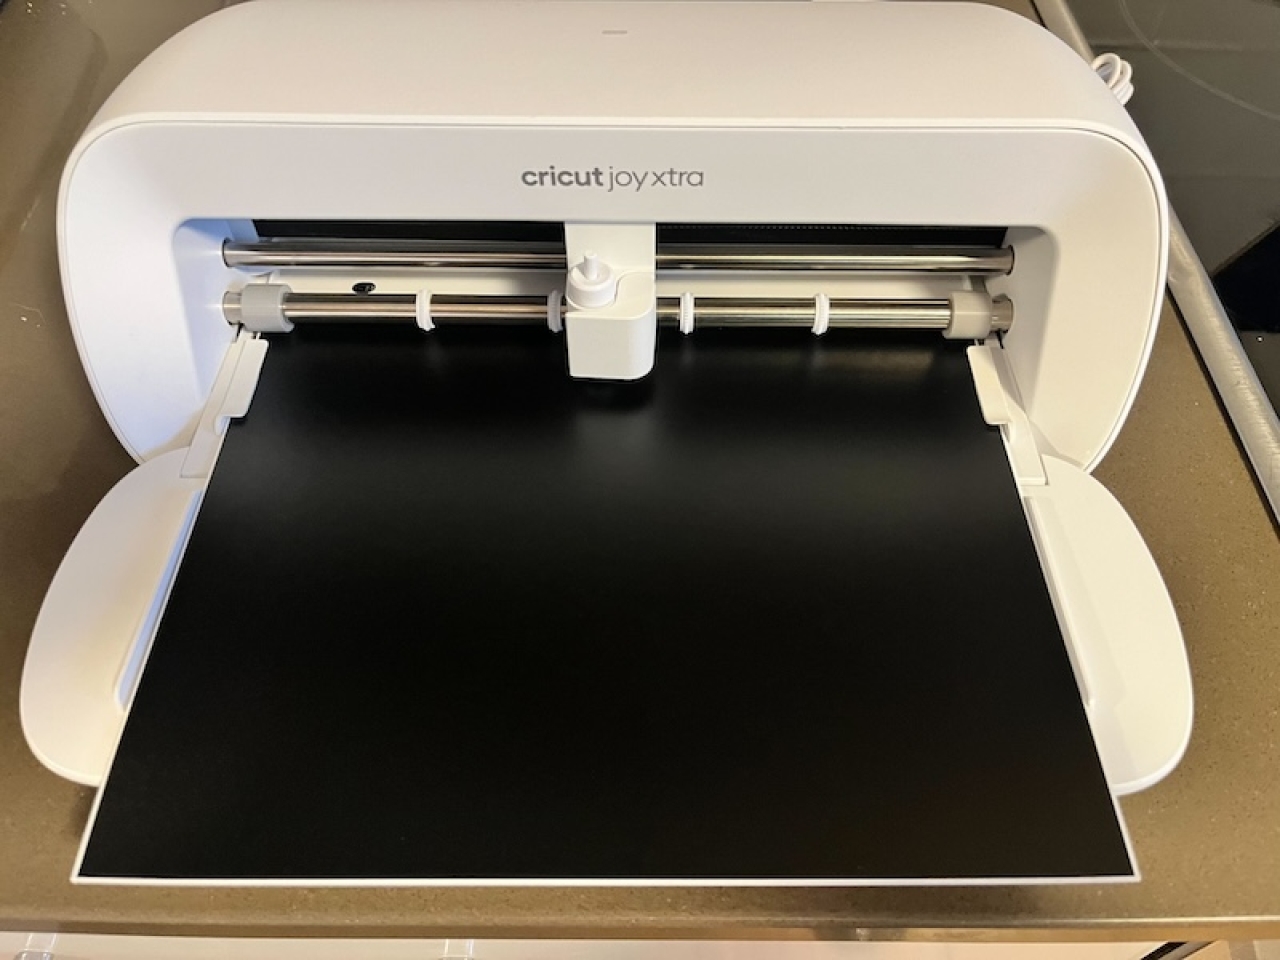 Cricut Joy Xtra: A Guide For Everything You Need To Know